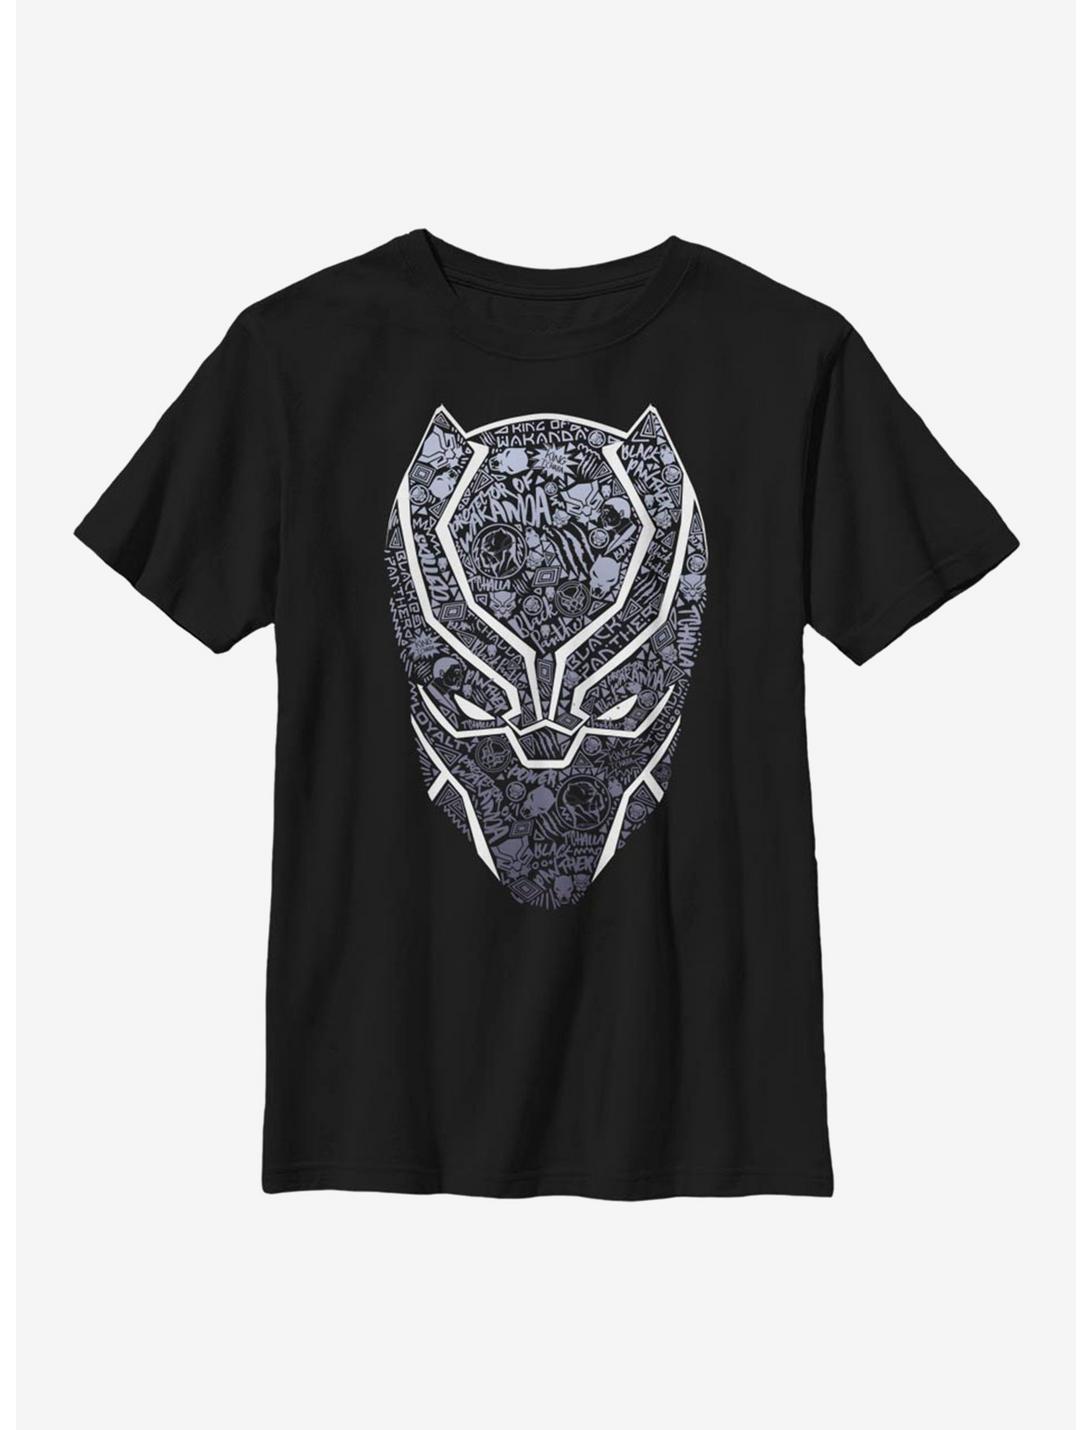 Marvel Black Panther Icon Fill Youth T-Shirt, BLACK, hi-res